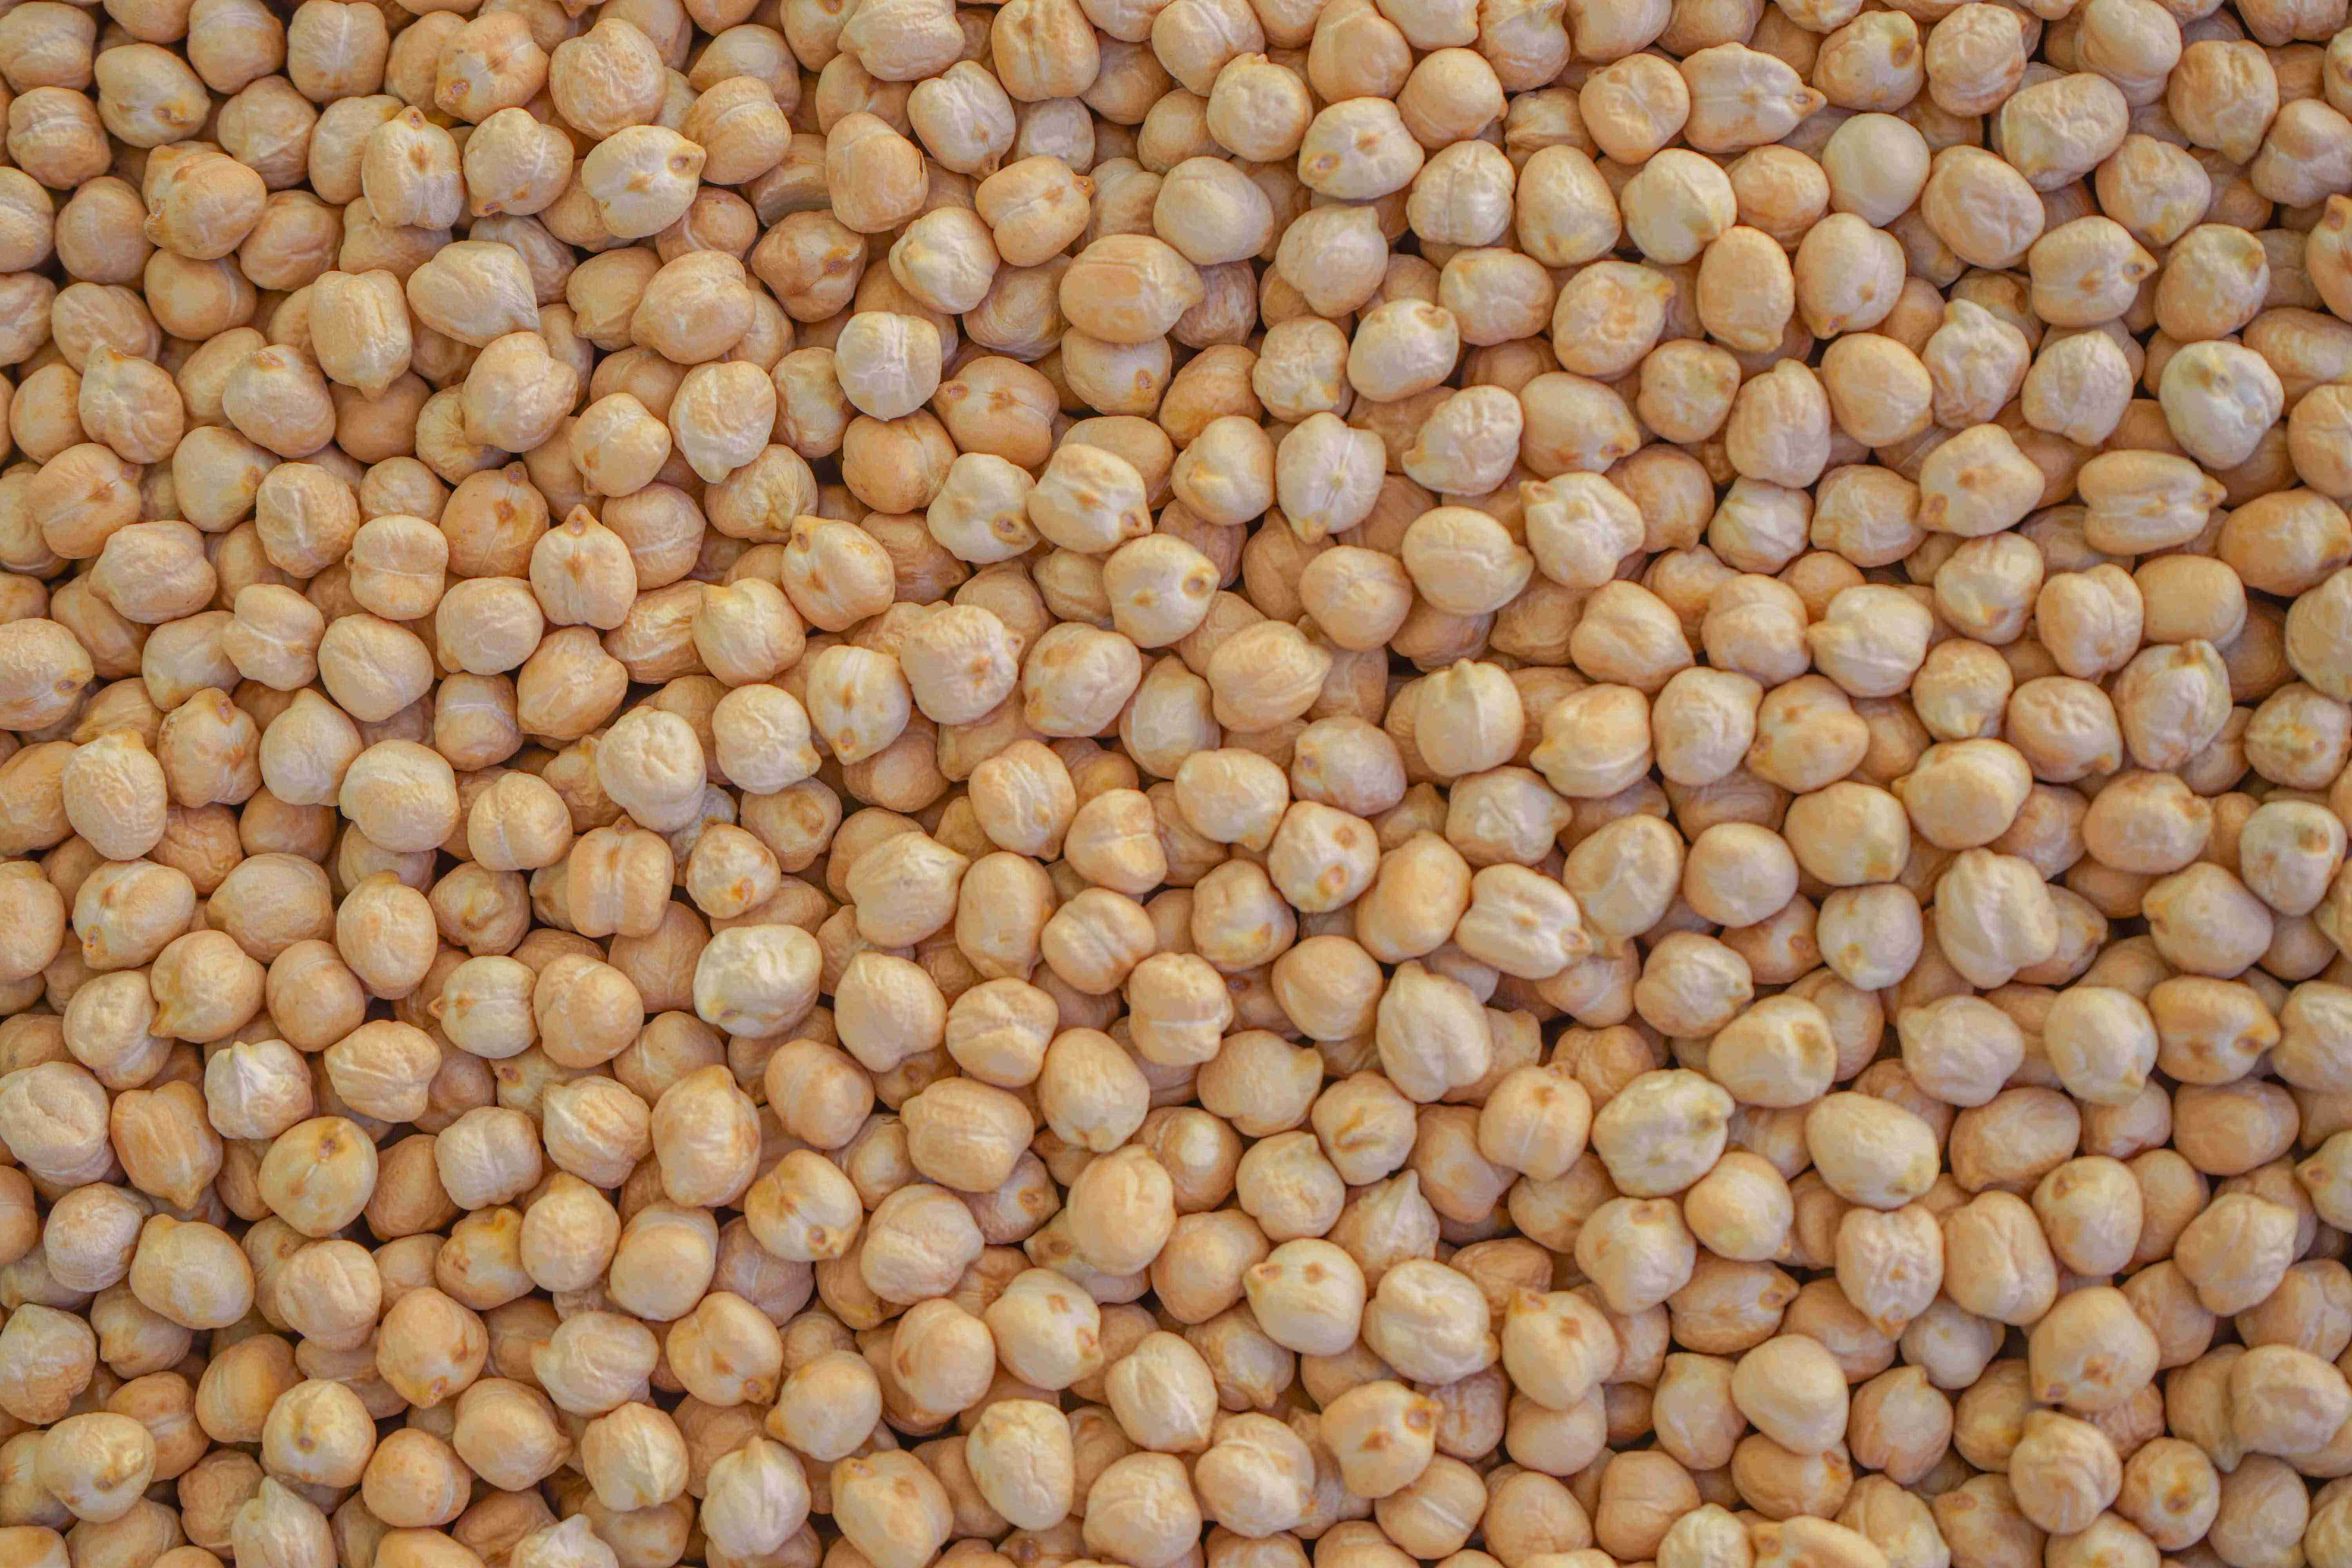 Chickpea: Another year with low planting area, but with good prospects in the market